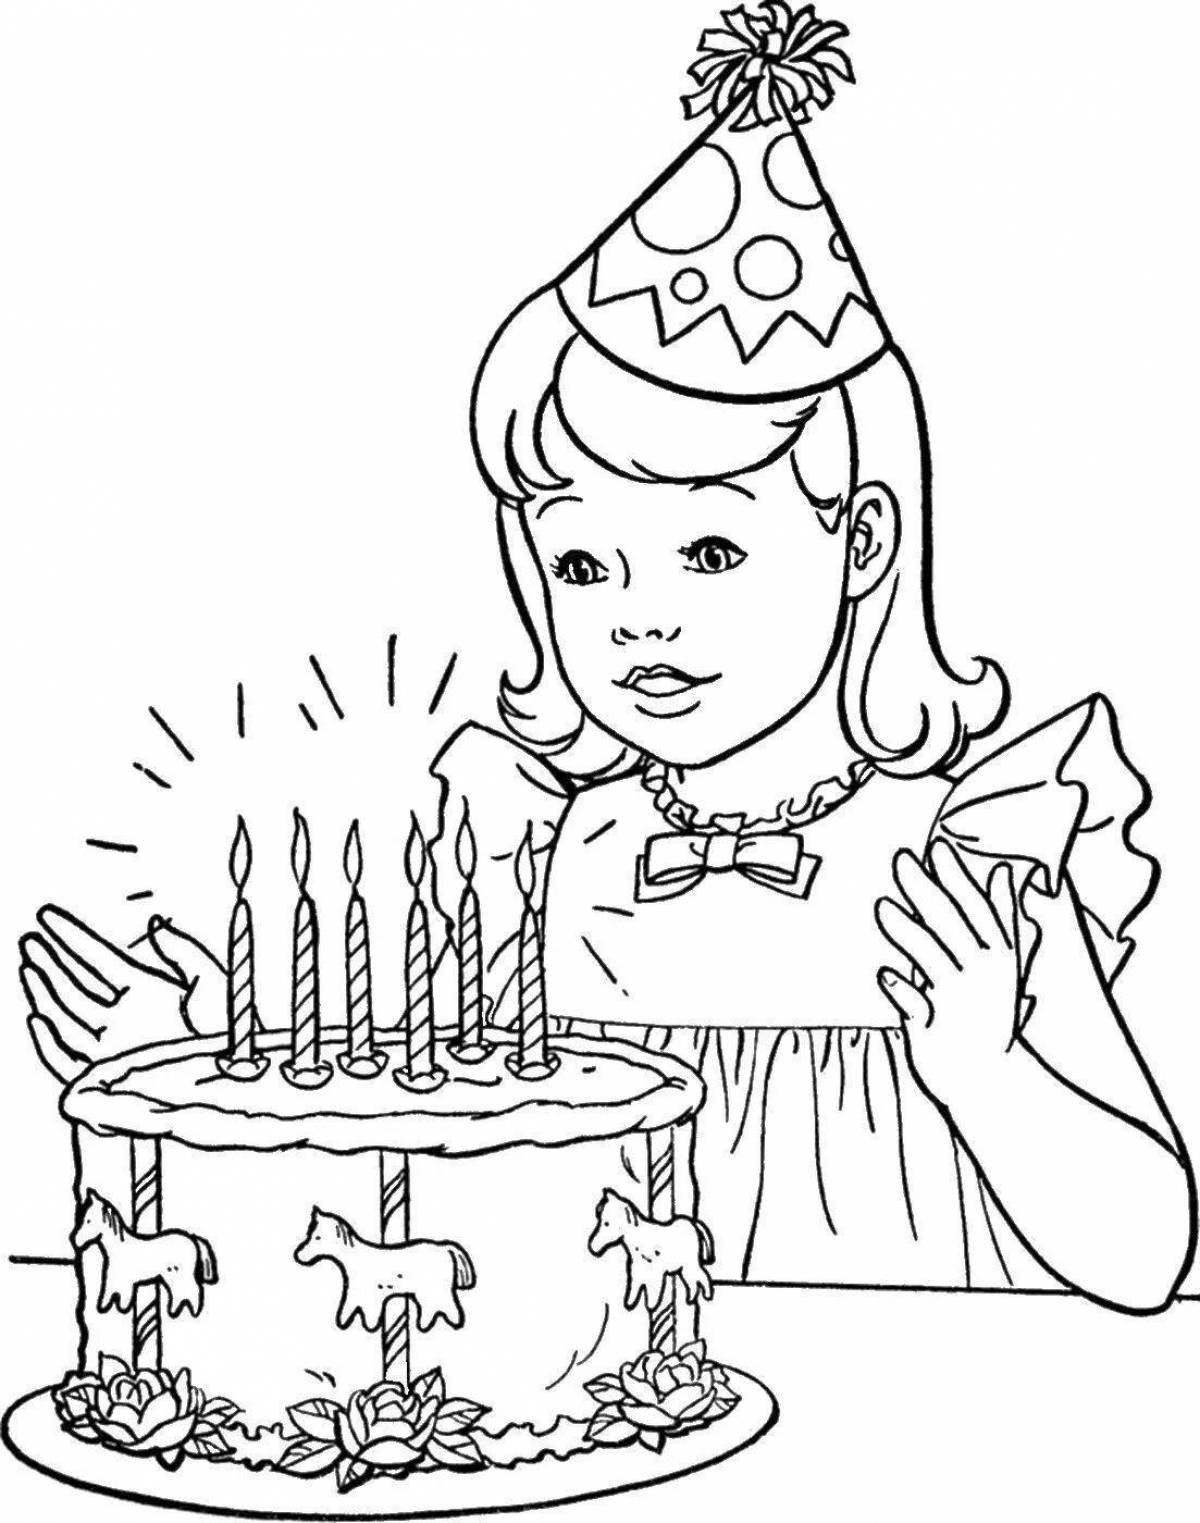 Playful holiday coloring page